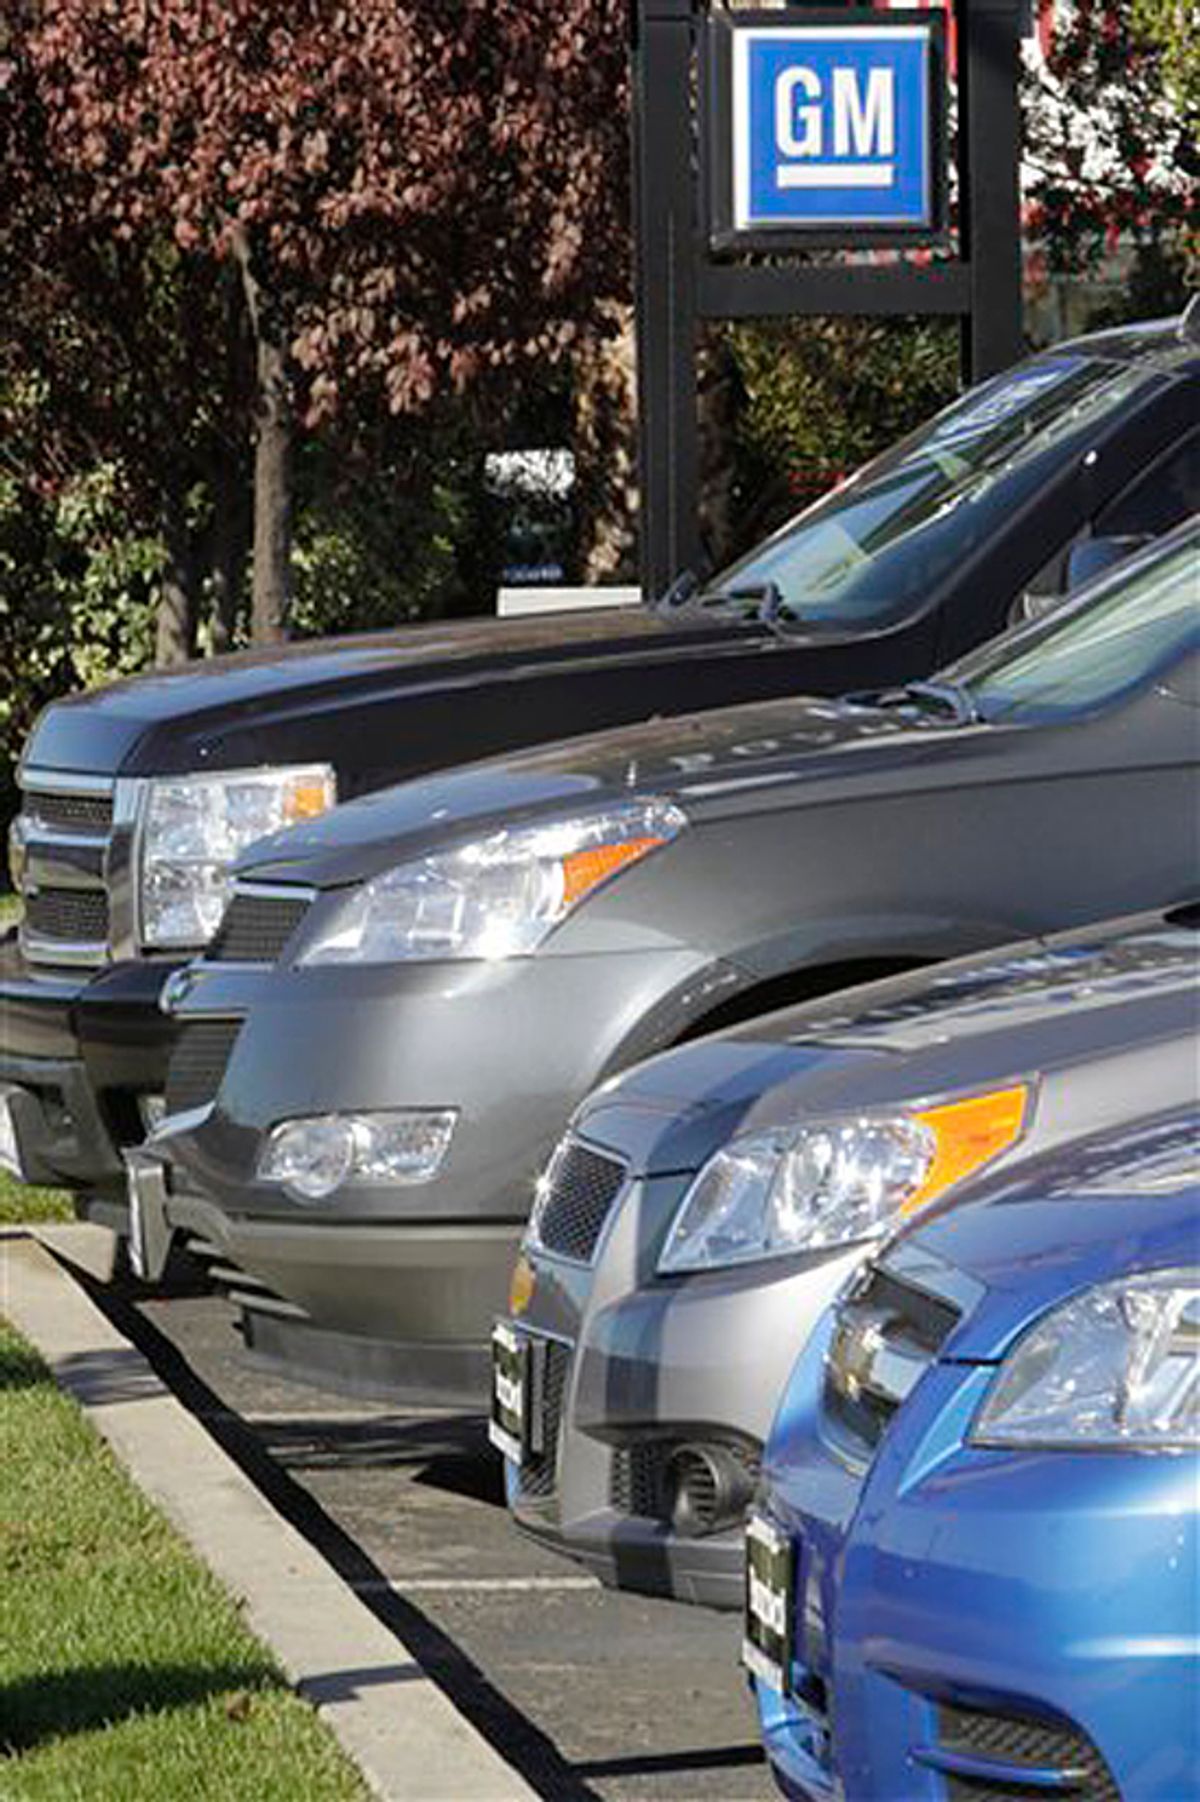 In this Nov. 29, 2010 photo, a row of GM vehicles are displayed at a GM dealership in Redwood City, Calif. Sales of General Motors cars and trucks rose 11 percent last month, a sign that the auto industry's slow recovery is gaining traction.(AP Photo/Paul Sakuma) (Paul Sakuma)